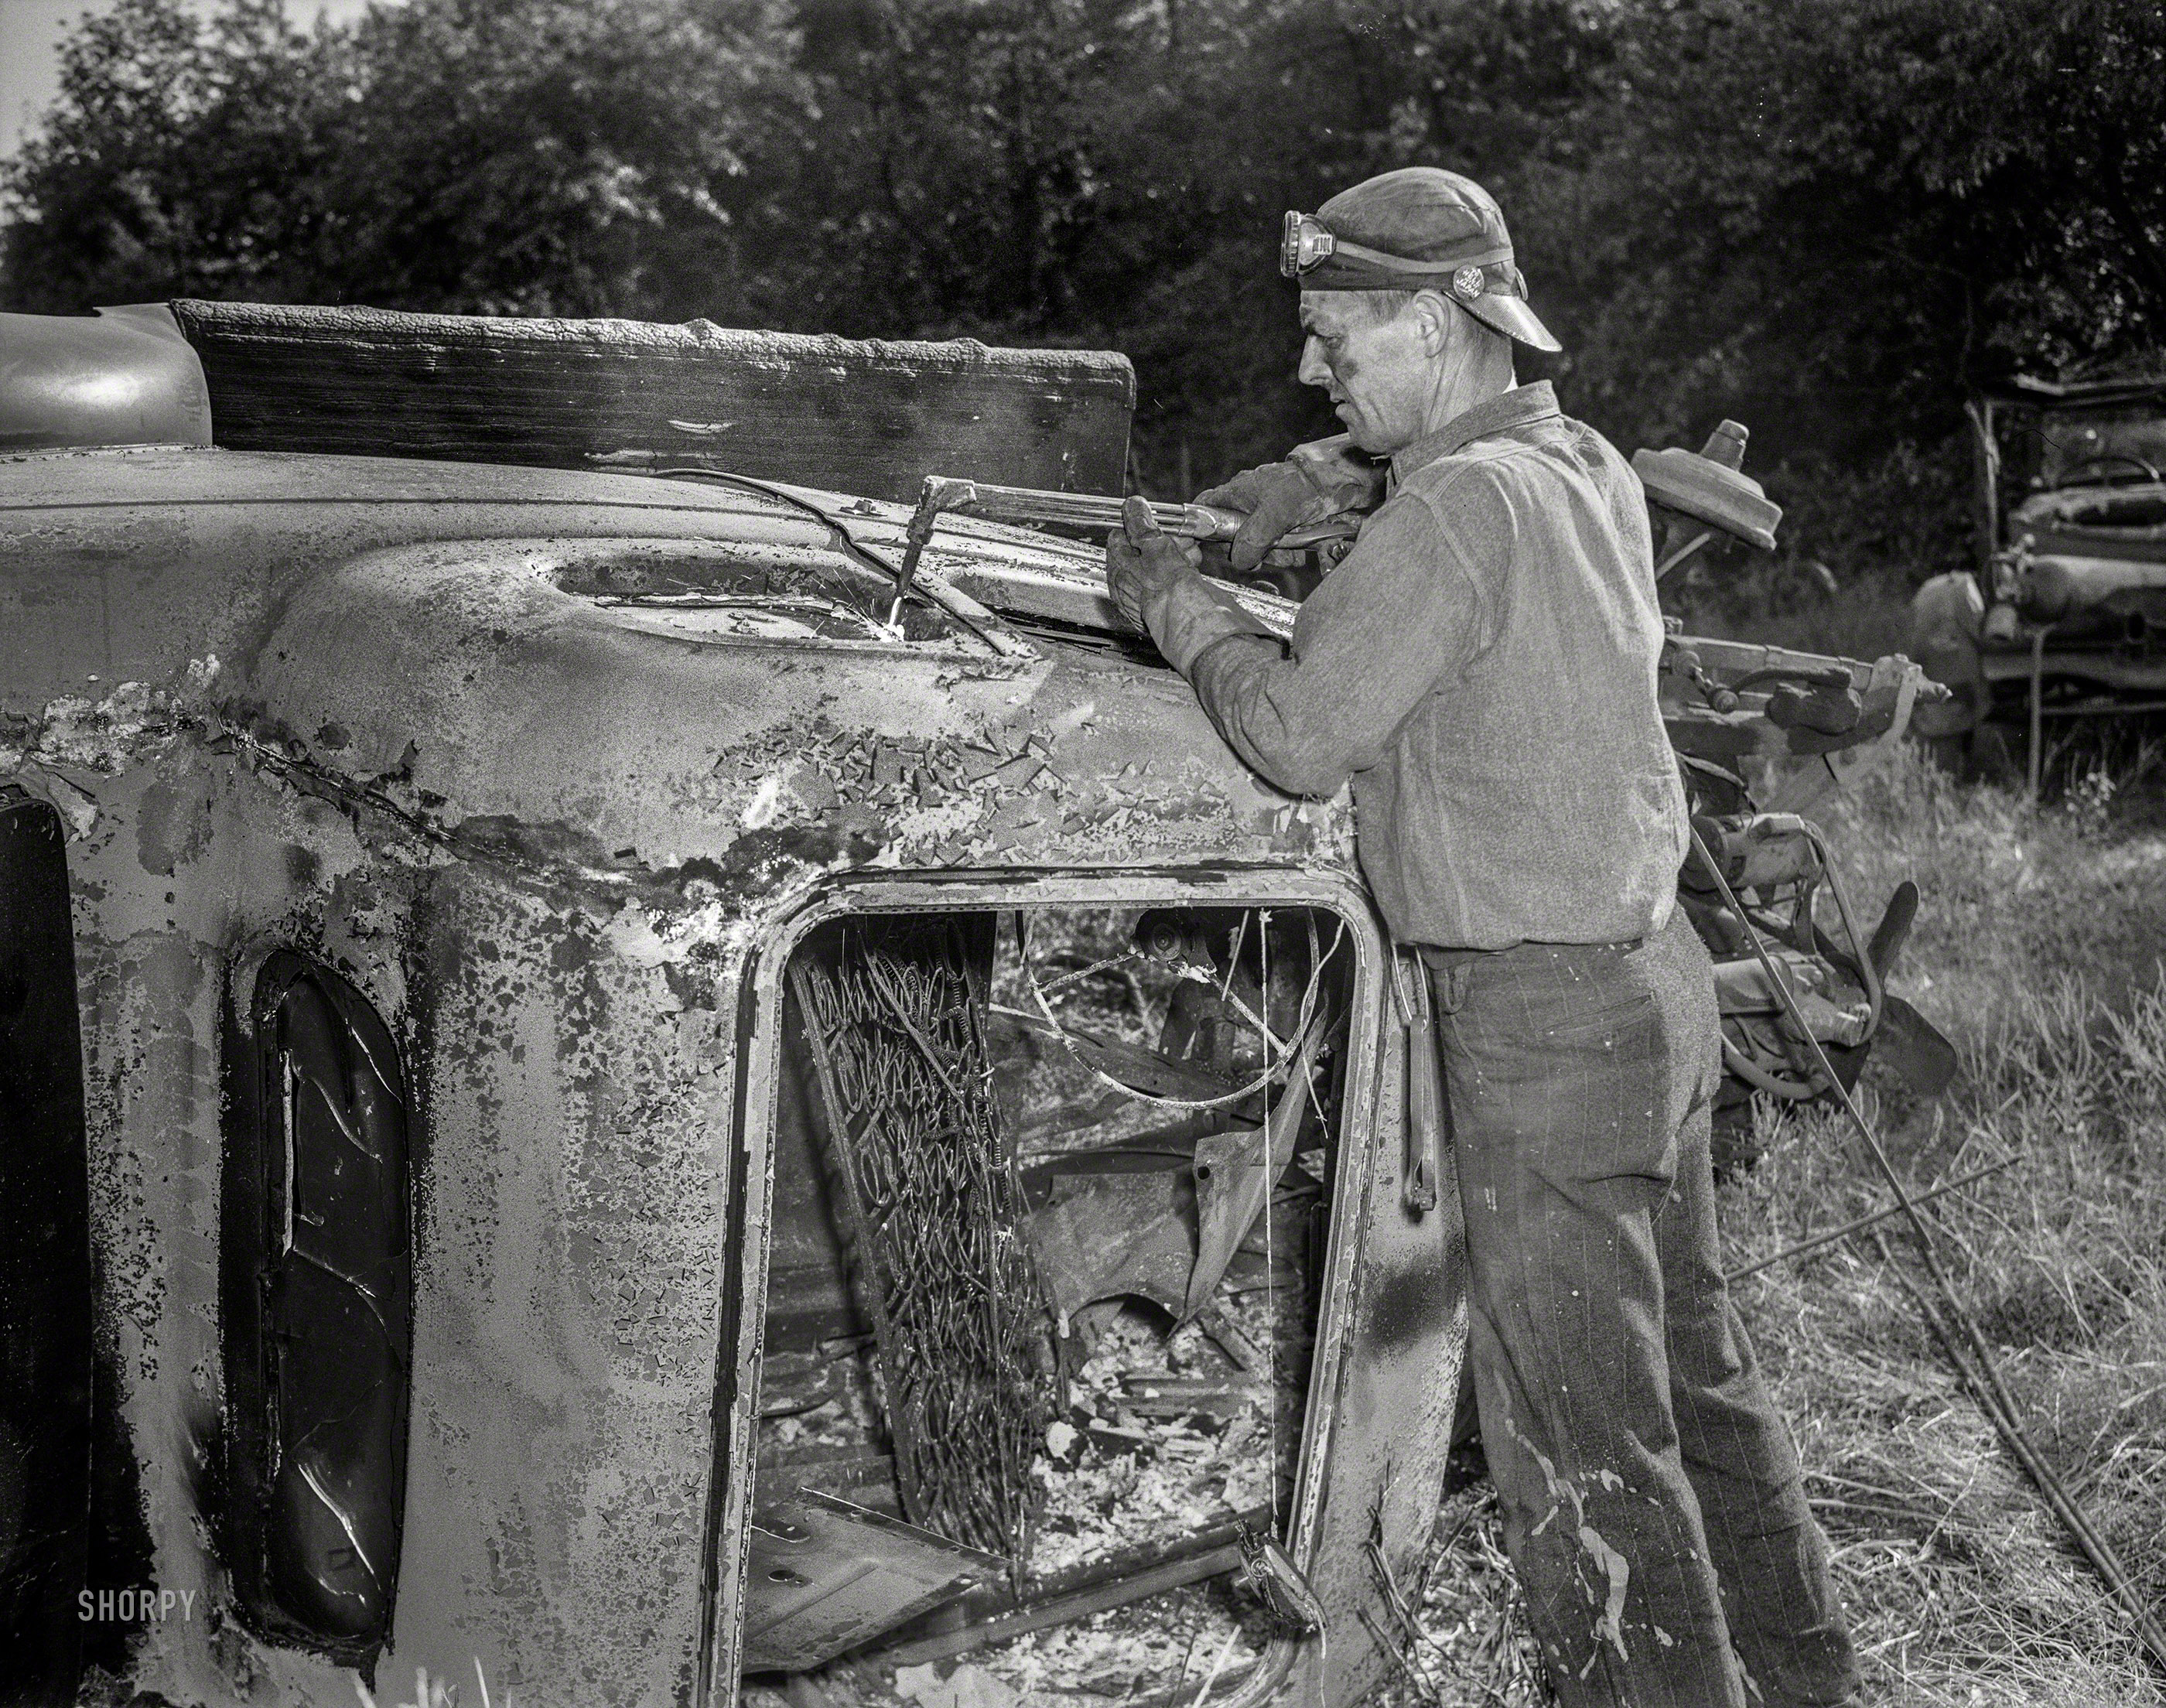 September 1942. "Automobile salvage. Automobile bodies are usually cut into four pieces so they can be readily loaded into a press for baling. The acetylene torch separates the lightweight body from the heavyweight steel frame of the car. Note: the auto has already been burned to remove all wooden parts, upholstery, oil, grease and other unusable and inflammable material." 4x5 nitrate negative by William Perlitch for the Office of War Information. View full size.